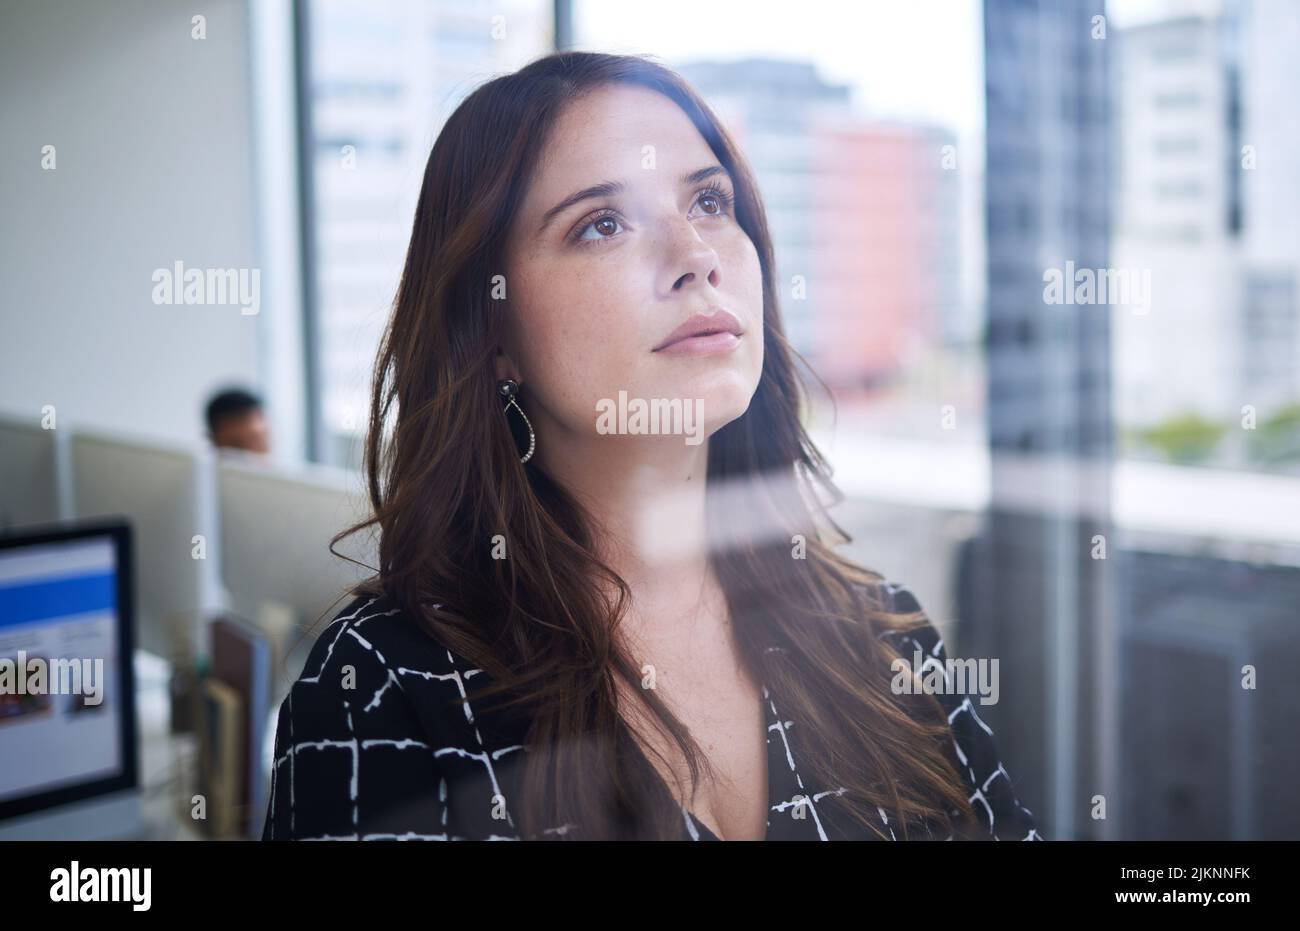 Have the courage to pursue your dreams. a young businesswoman looking thoughtful while standing at a window in an office. Stock Photo